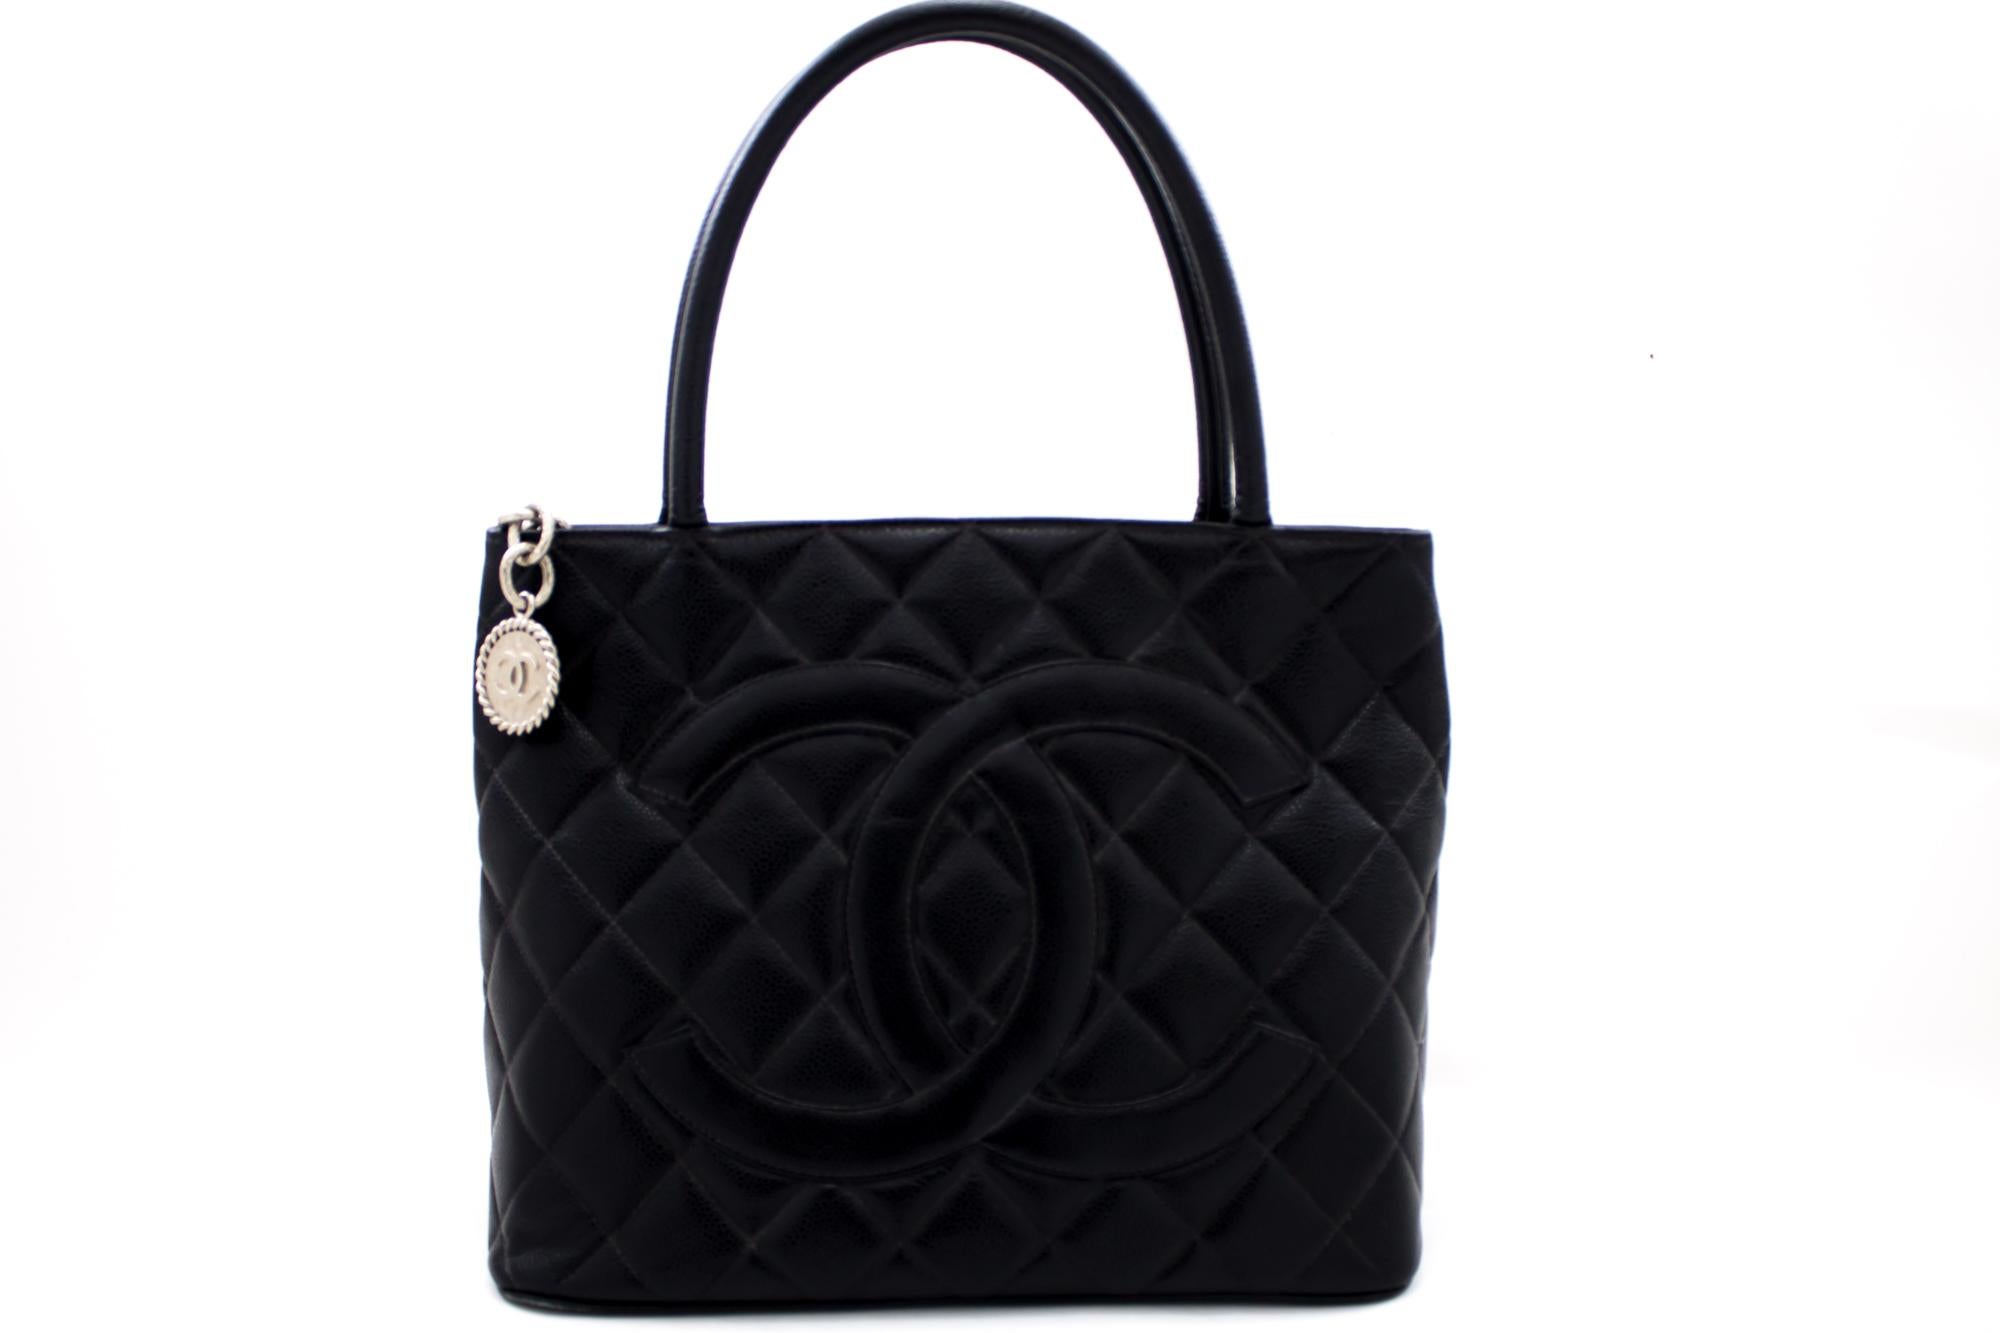 An authentic CHANEL Silver Medallion Caviar Shoulder Bag Shopping Tote Black. The color is Black. The outside material is Leather. The pattern is Solid. This item is Contemporary. The year of manufacture would be 2002.
Conditions & Ratings
Outside